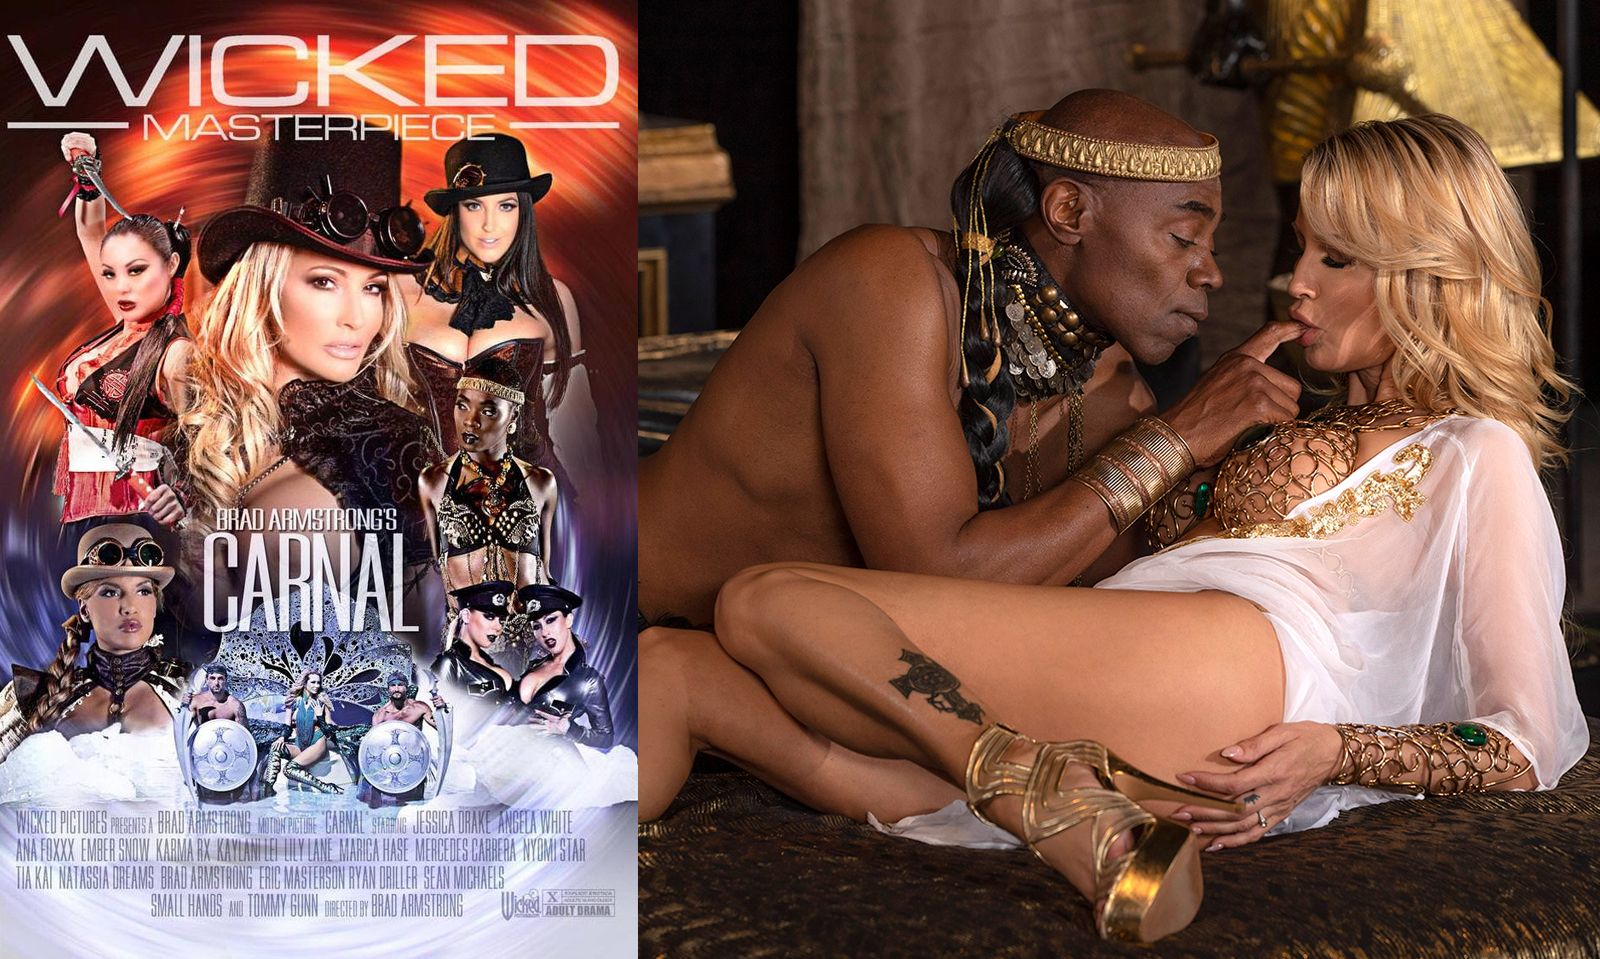 1600px x 959px - Wicked Launches Armstrong's 'Carnal' With Social Media Campaign | AVN